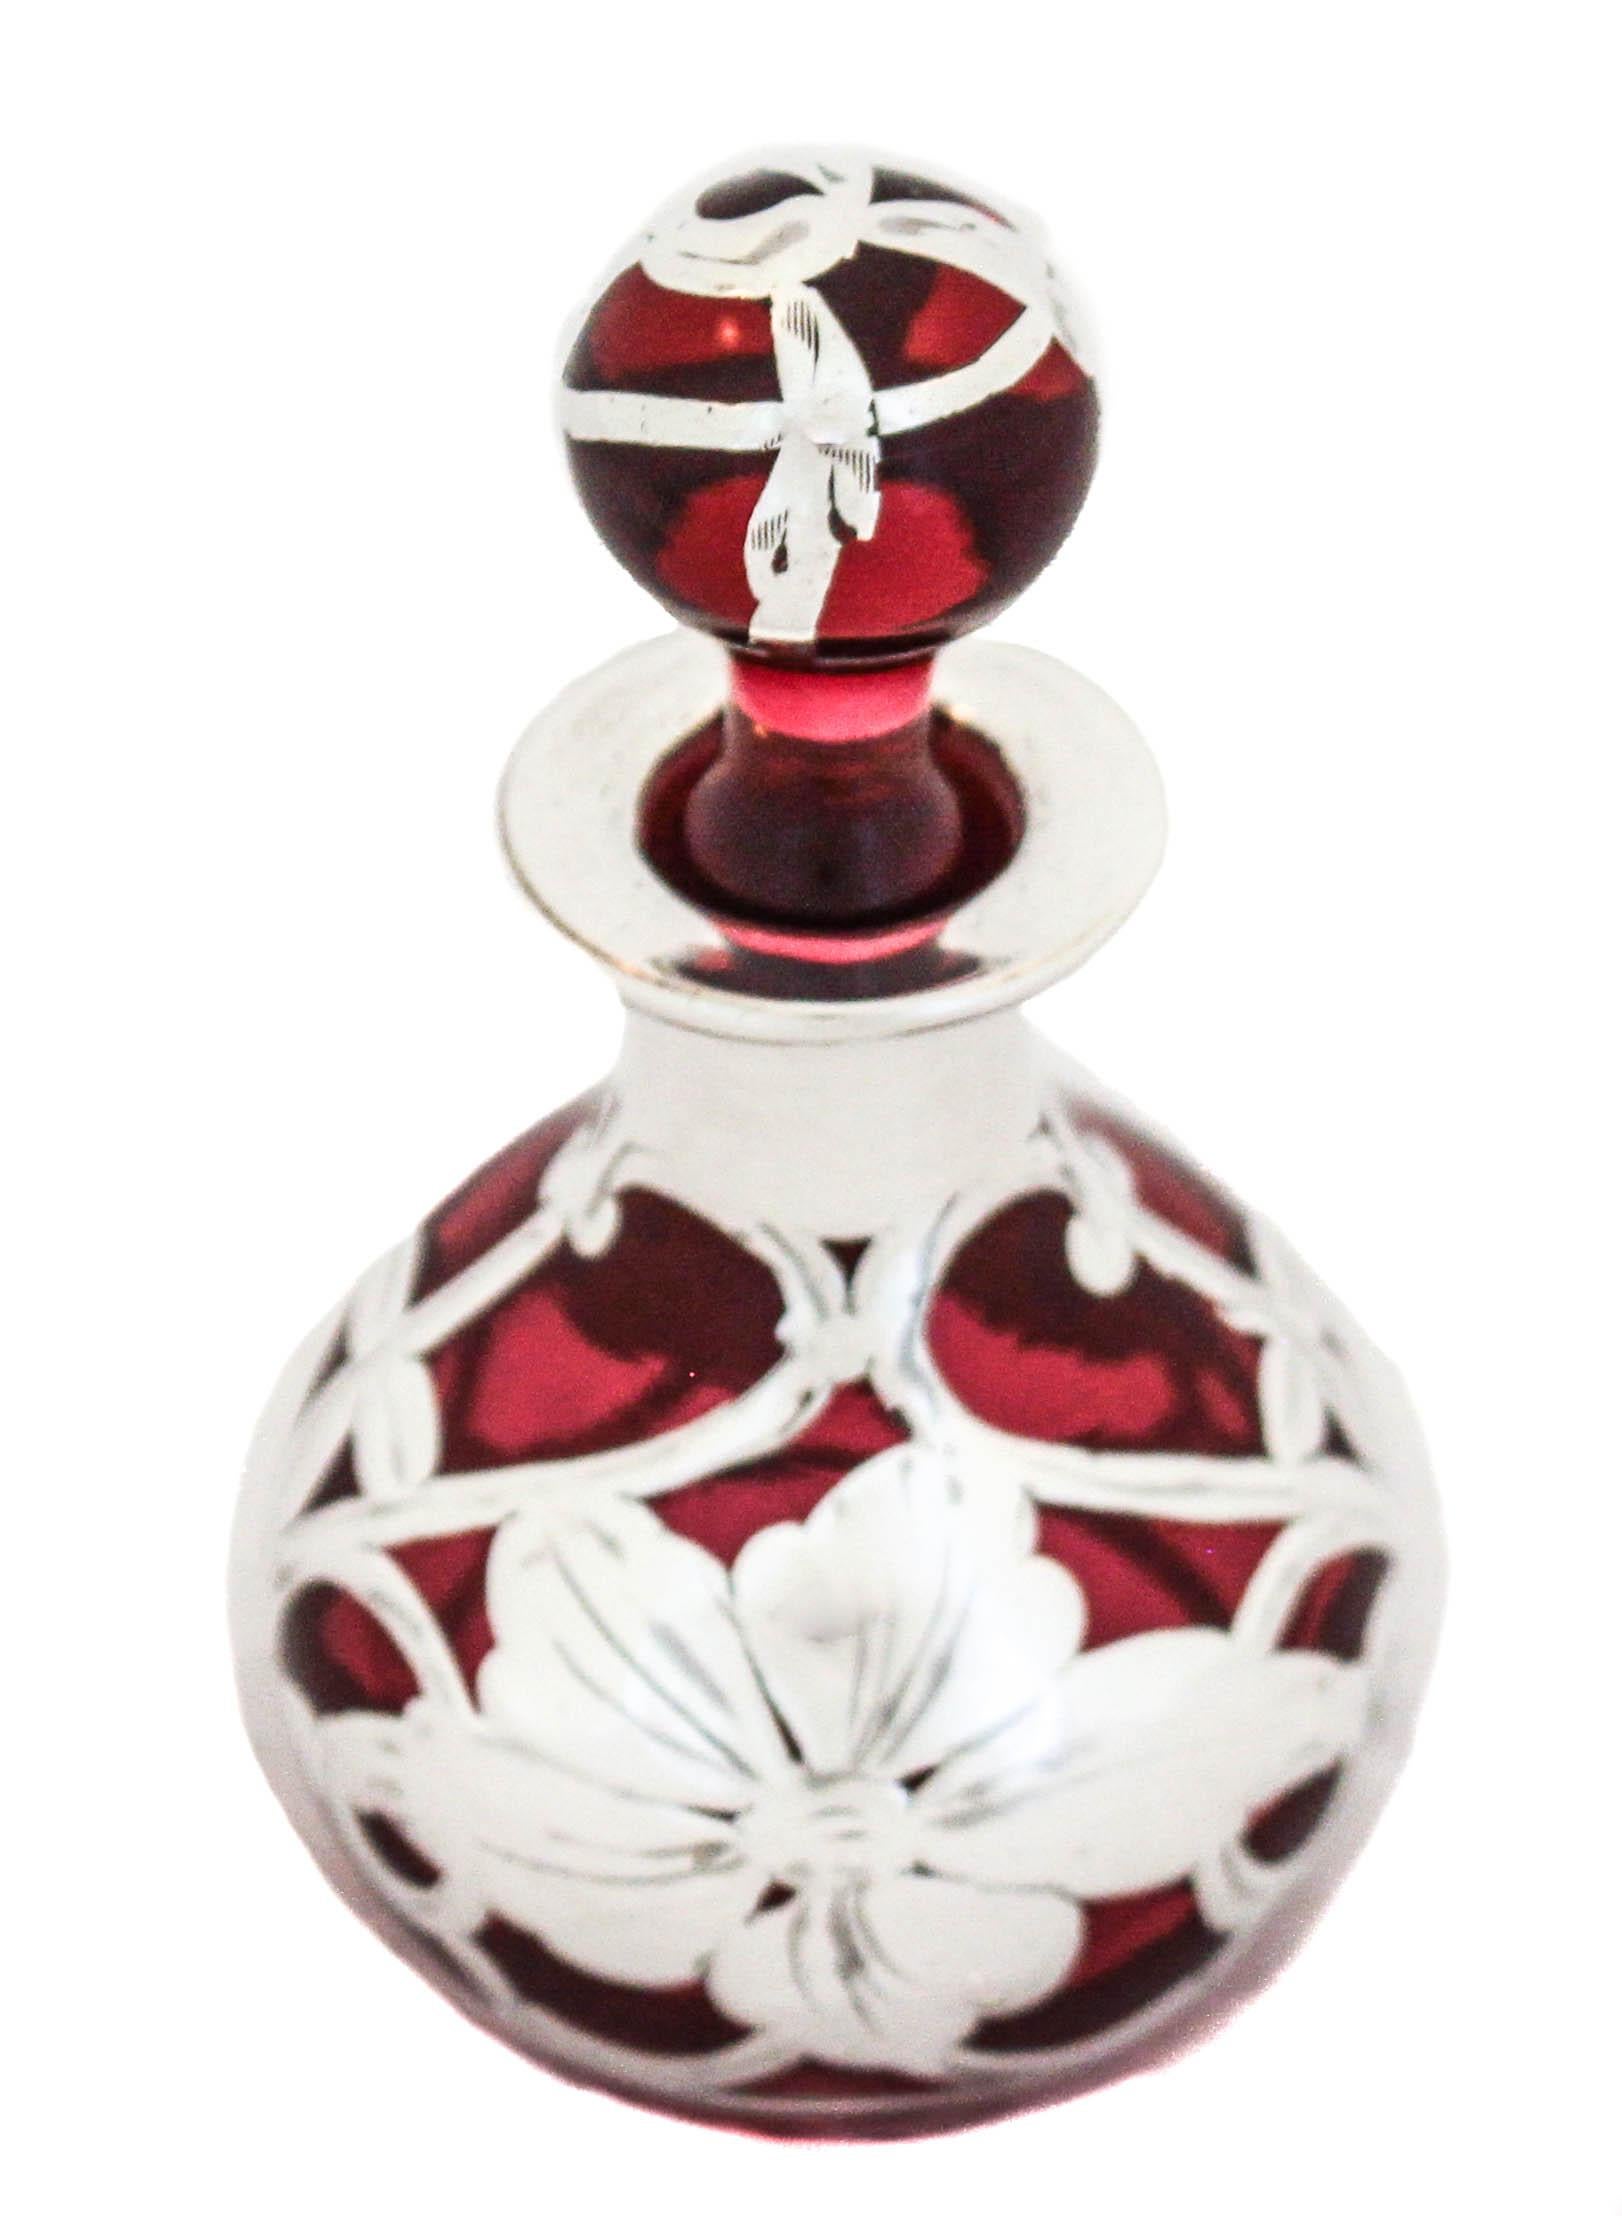 Being offered is a sterling silver and crystal perfume bottle from the Art Nouveau period.  It has a ruby-red glass with sterling overlay.  The silver pattern is quintessential Art Nouveau in its’ style of flowers and swirls.  The color is so rich